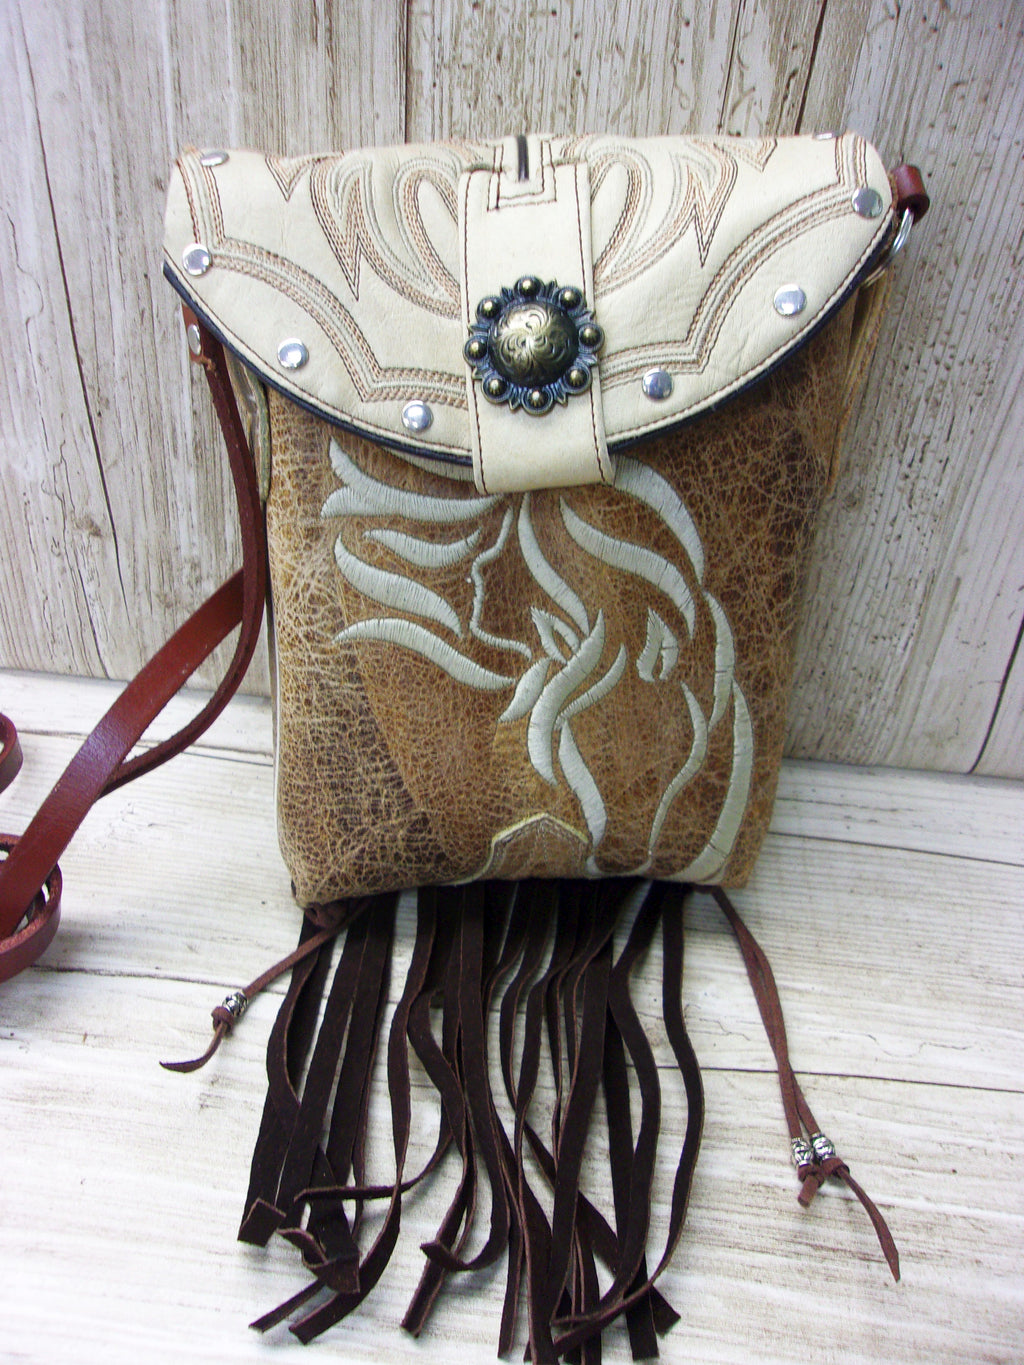 Small Western Purse -Purse with Fringe - Cowboy Boot Purse - Small Crossbody Bag sm229 Chris Thompson Bags